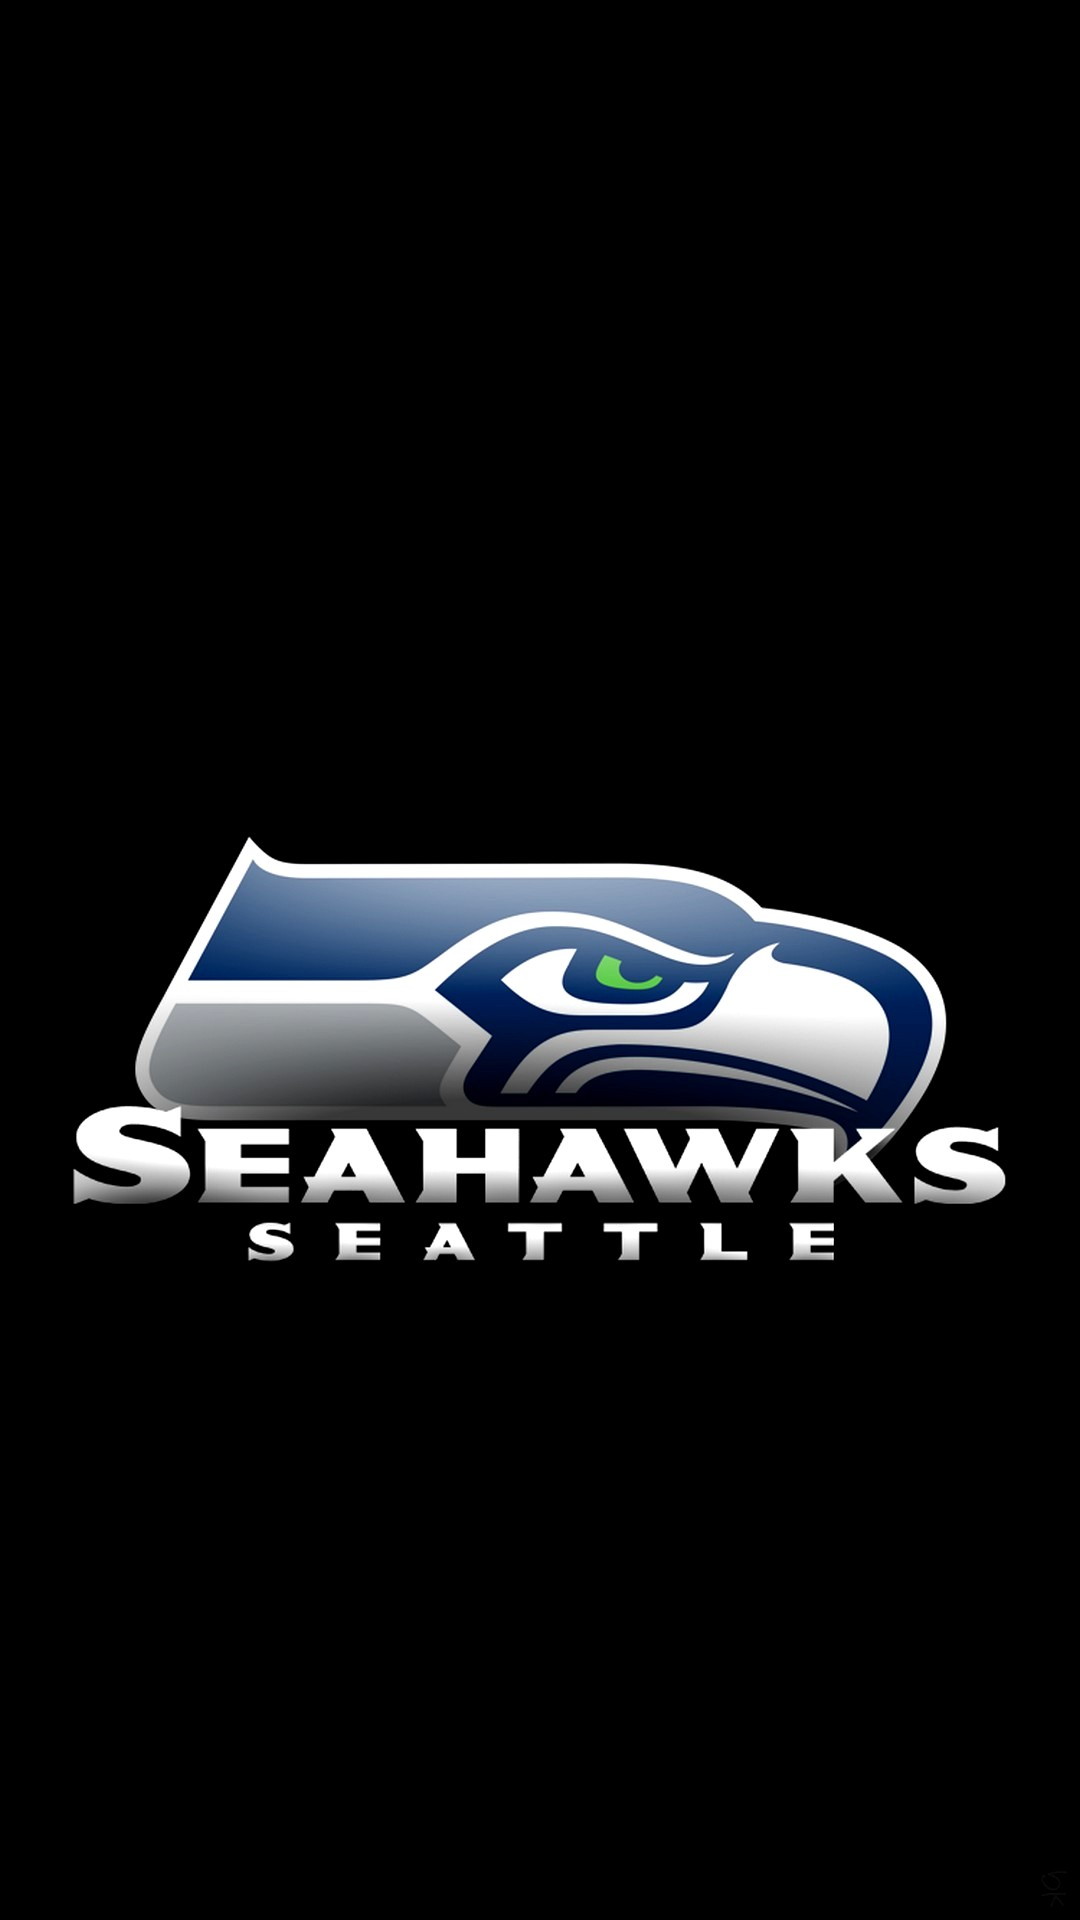 iPhone Wallpaper HD Seattle Seahawks With high-resolution 1080X1920 pixel. You can use this wallpaper for your Mac or Windows Desktop Background, iPhone, Android or Tablet and another Smartphone device